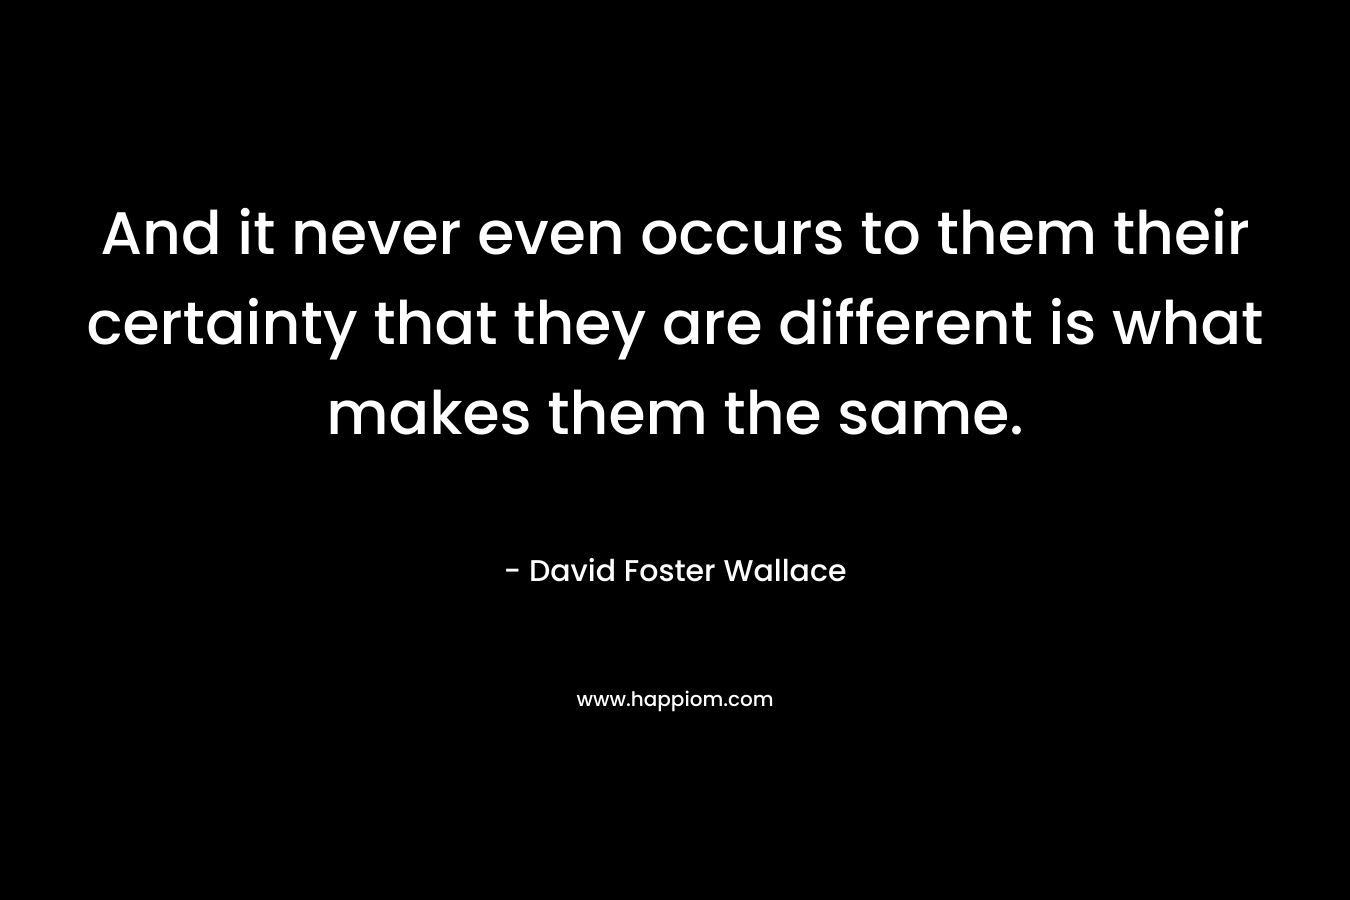 And it never even occurs to them their certainty that they are different is what makes them the same.